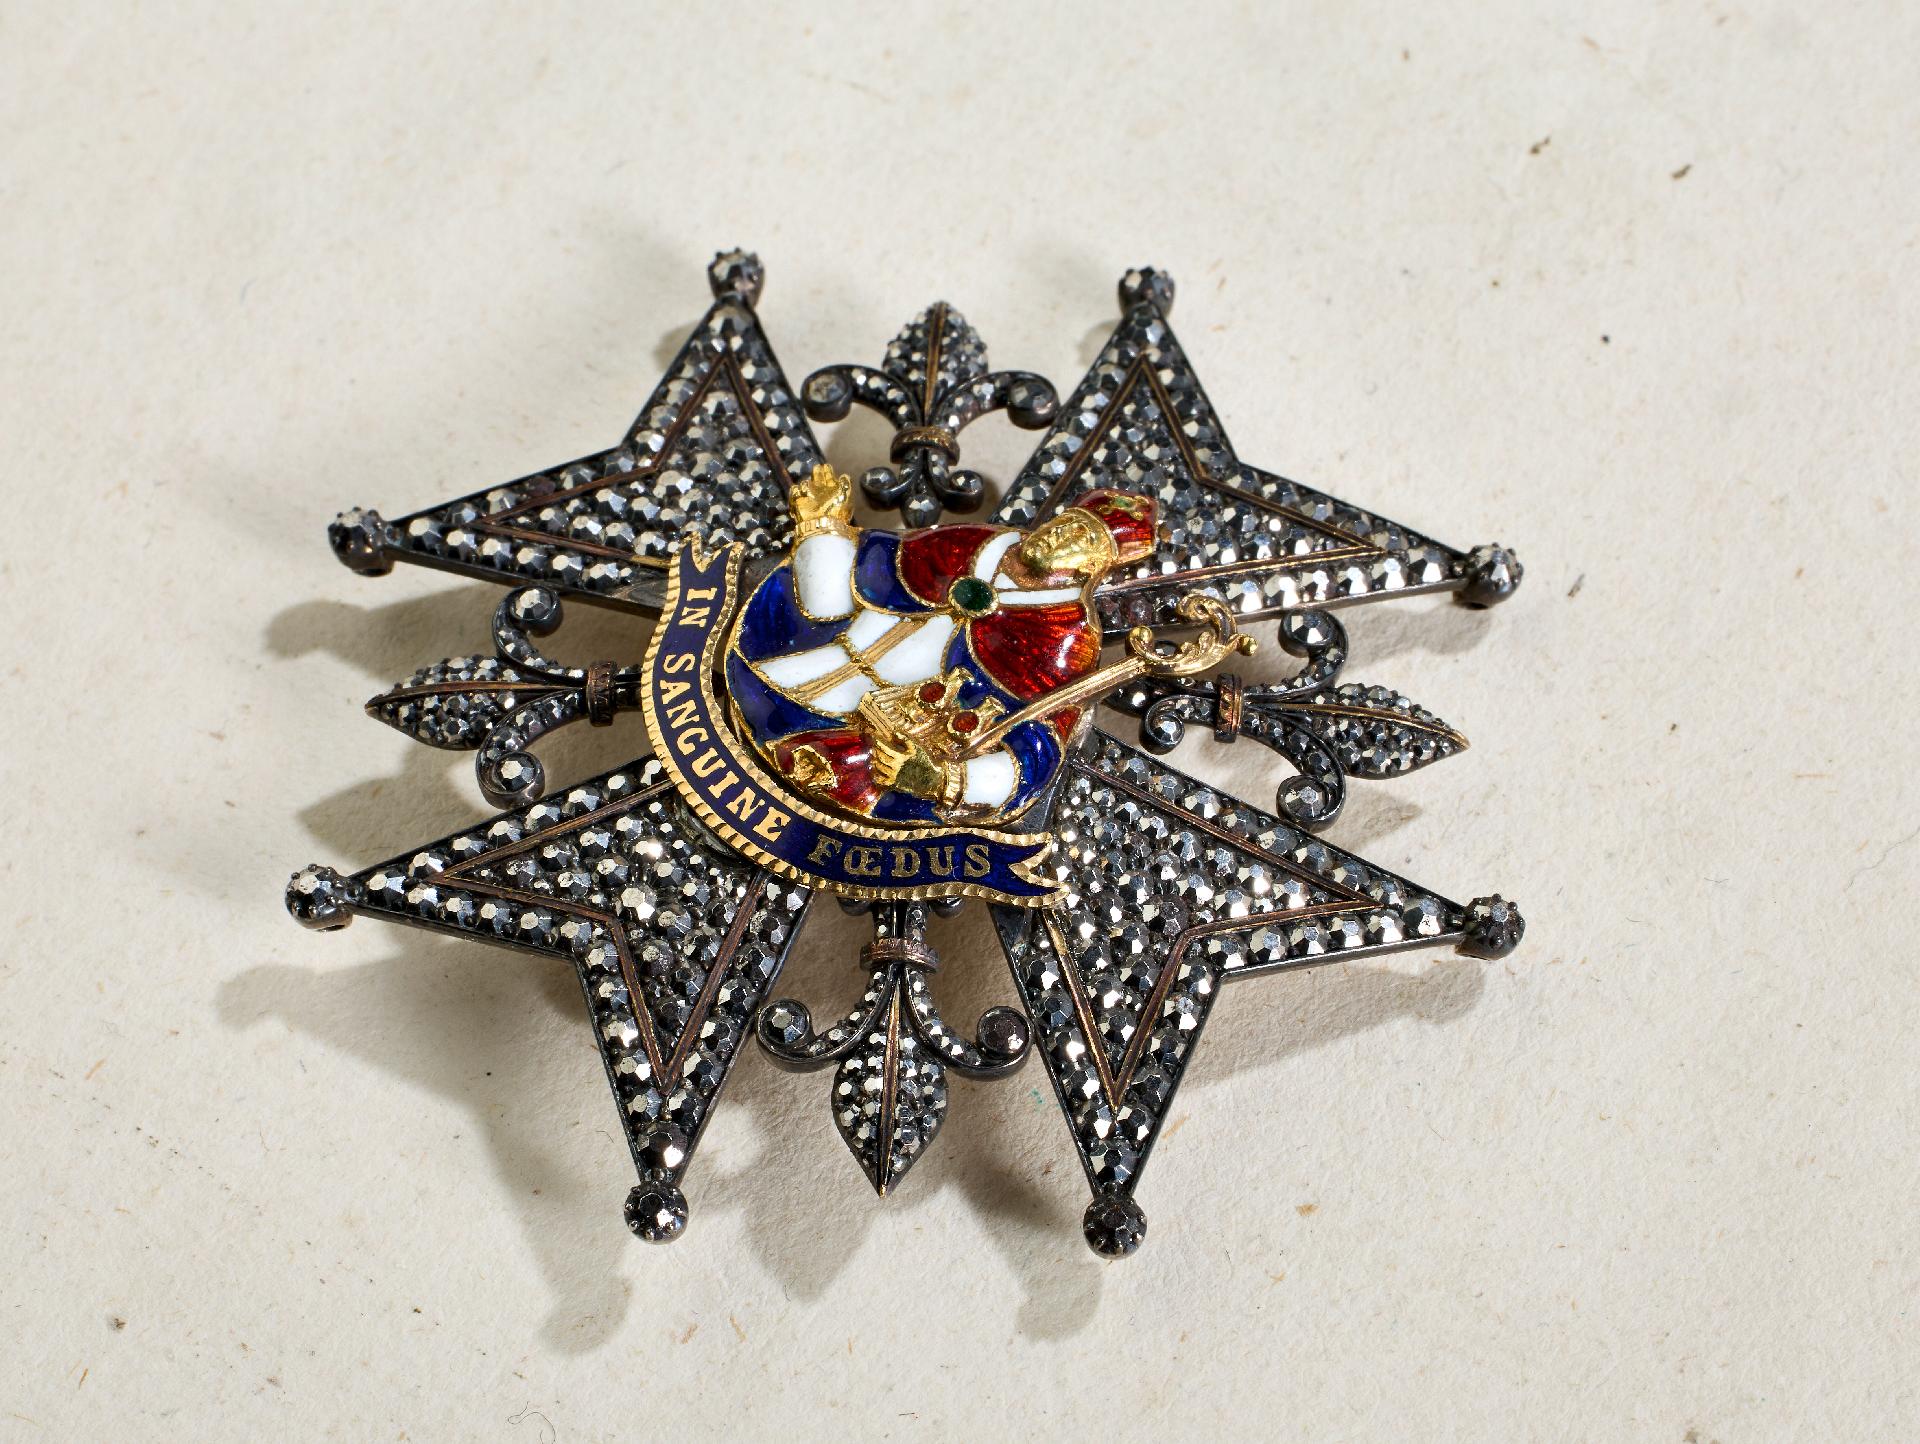 Königreich beider Sizilien : Order of St. Januarius Breast Star to the Ornamented Necklace. - Image 6 of 6